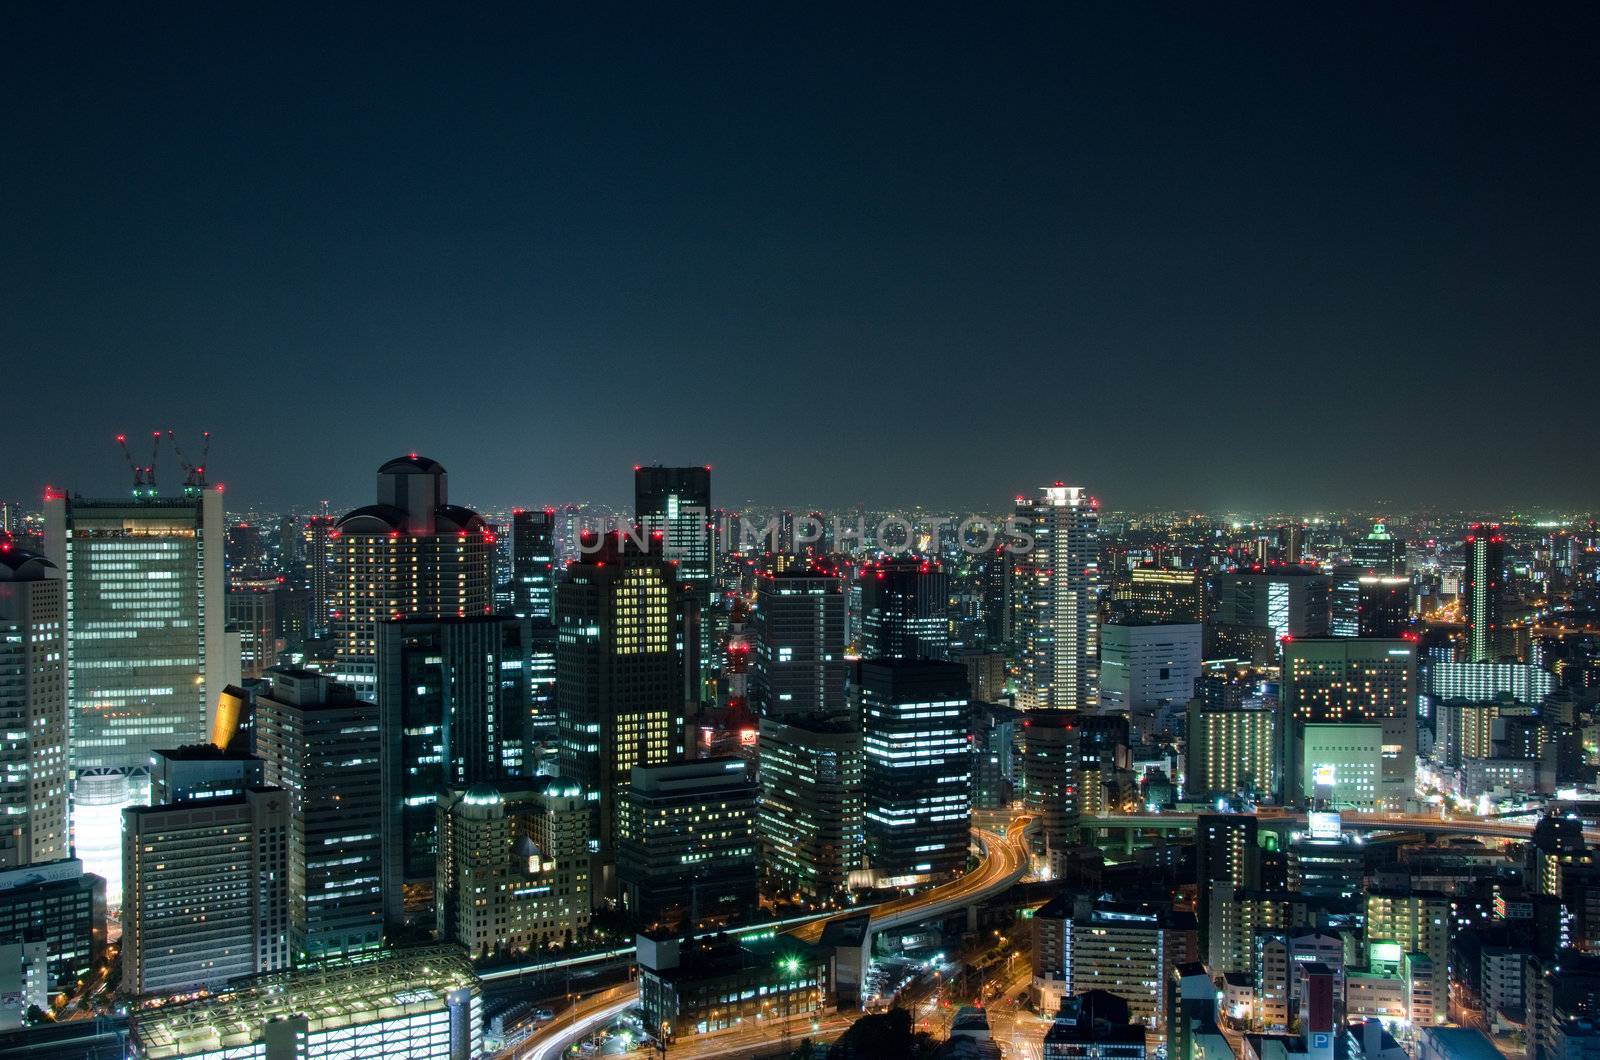 Skyline of Osaka City in Japan at night with lots of lights